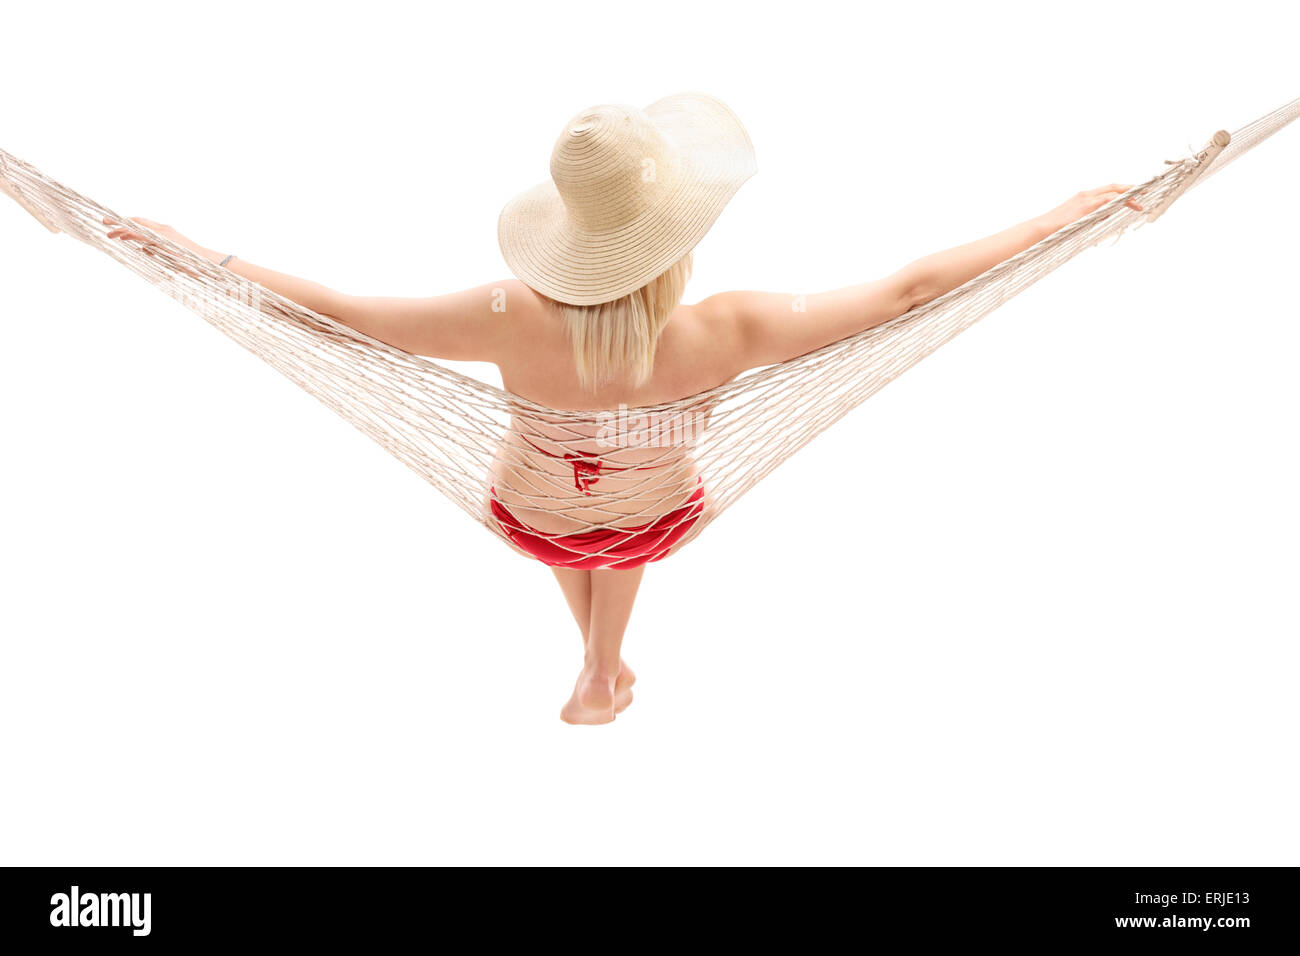 Rear view studio shot of a young woman in a red bikini sitting in a hammock isolated on white background Stock Photo